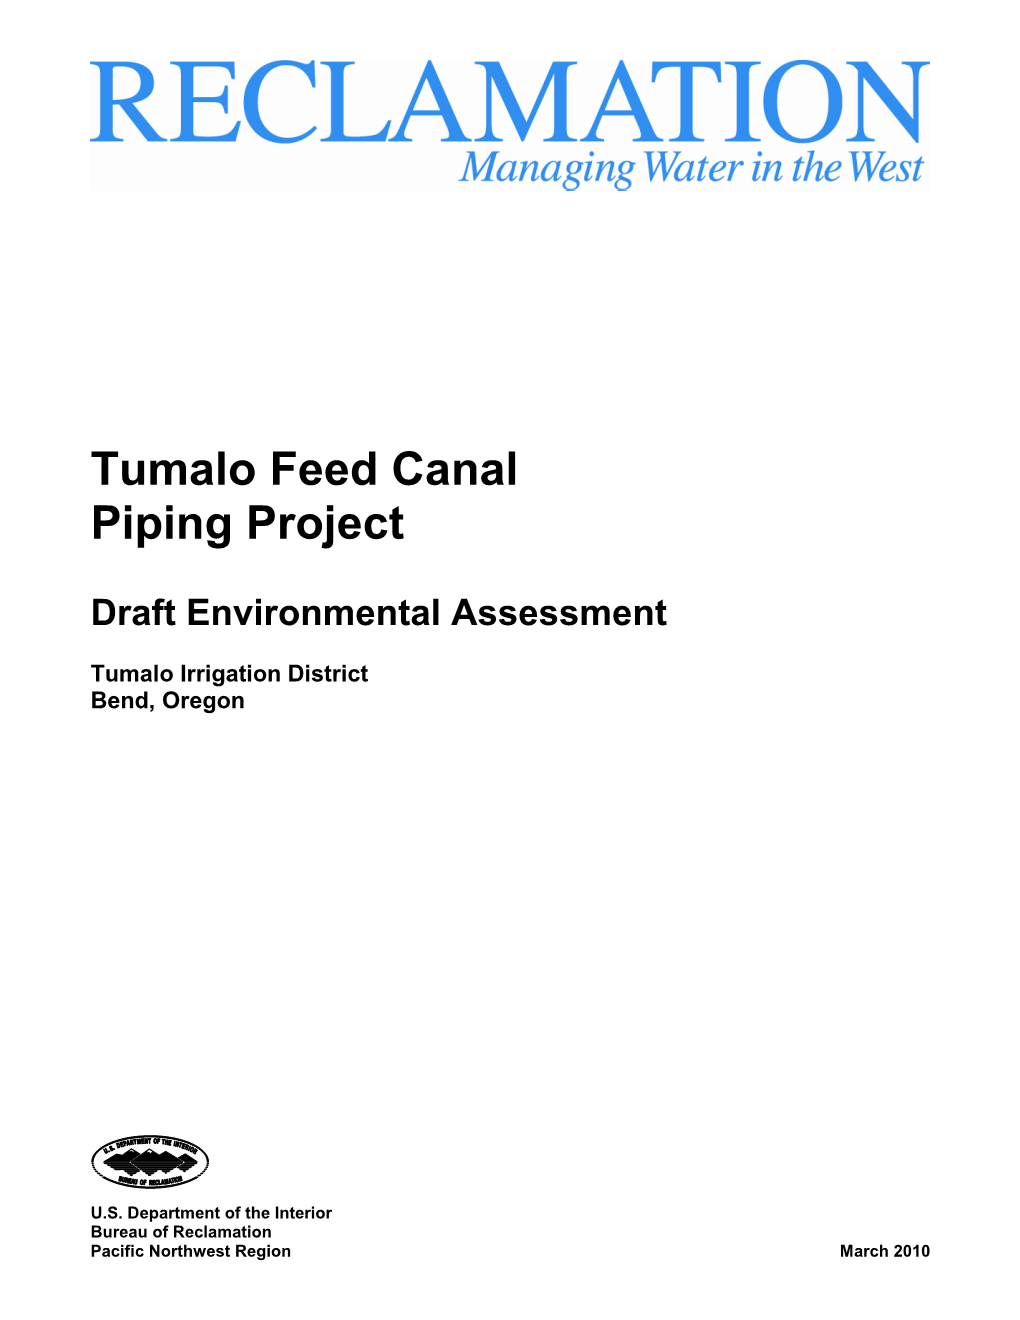 Tumalo Feed Canal Piping Project Draft Environmental Assessment